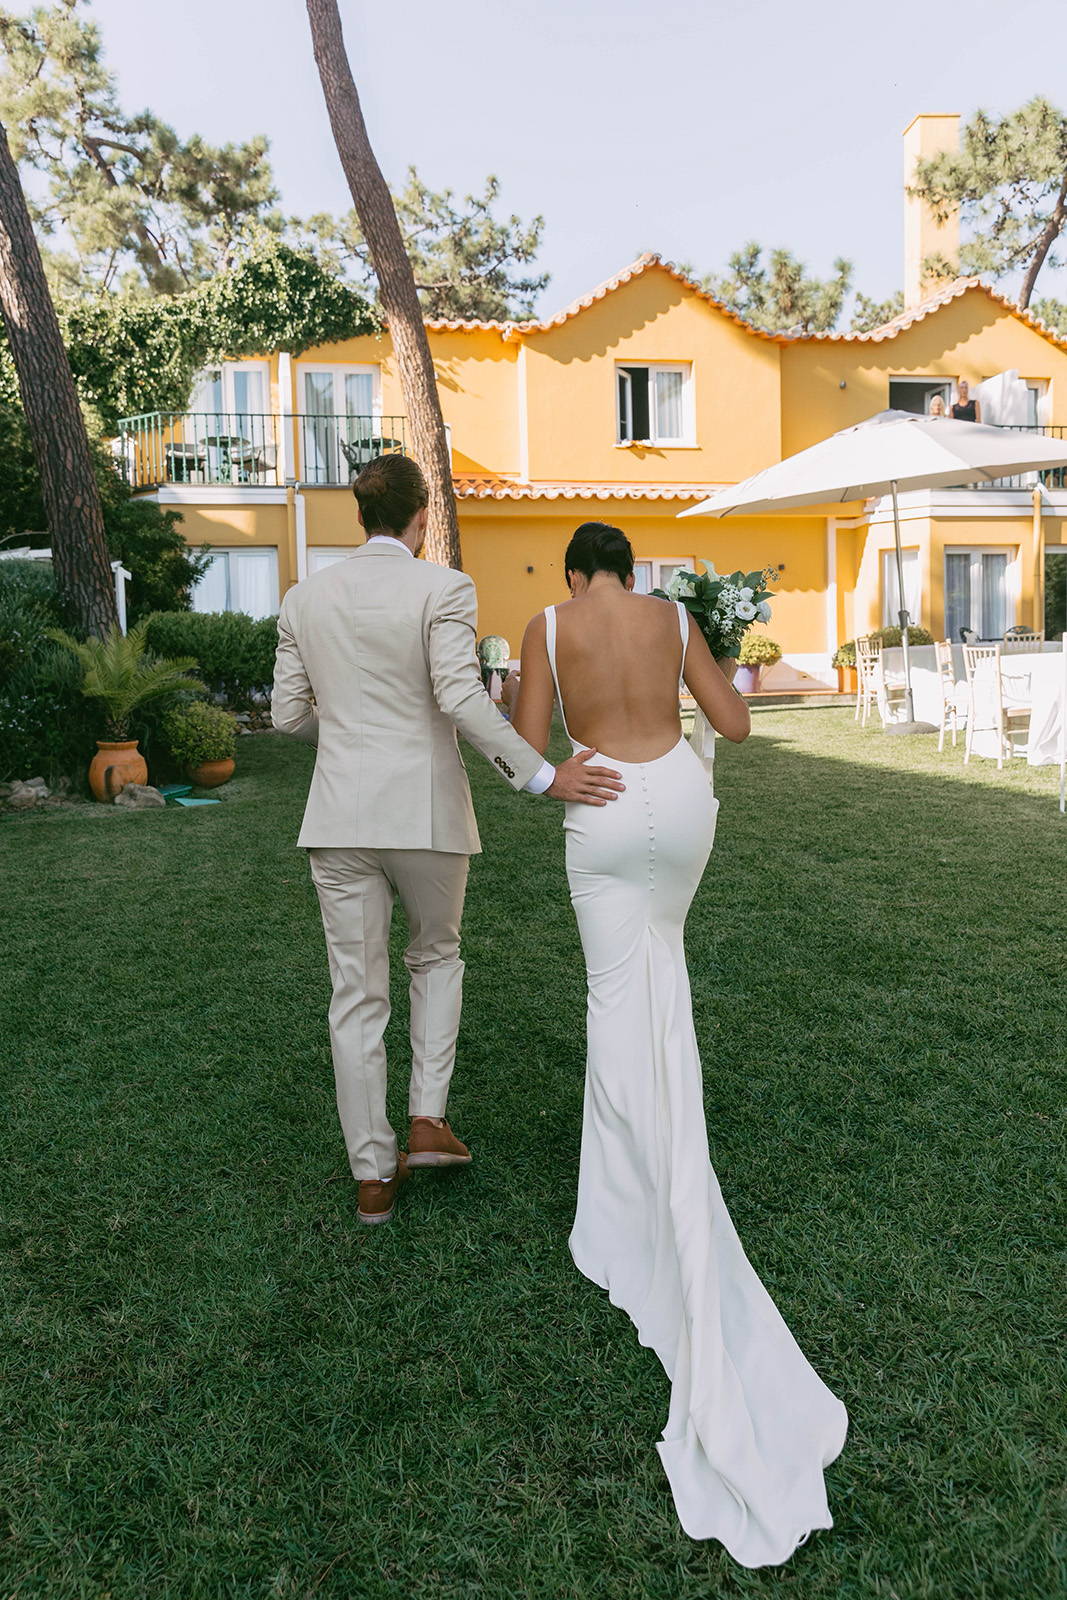 Bride and groom walking together with back detailing of the Martini gown